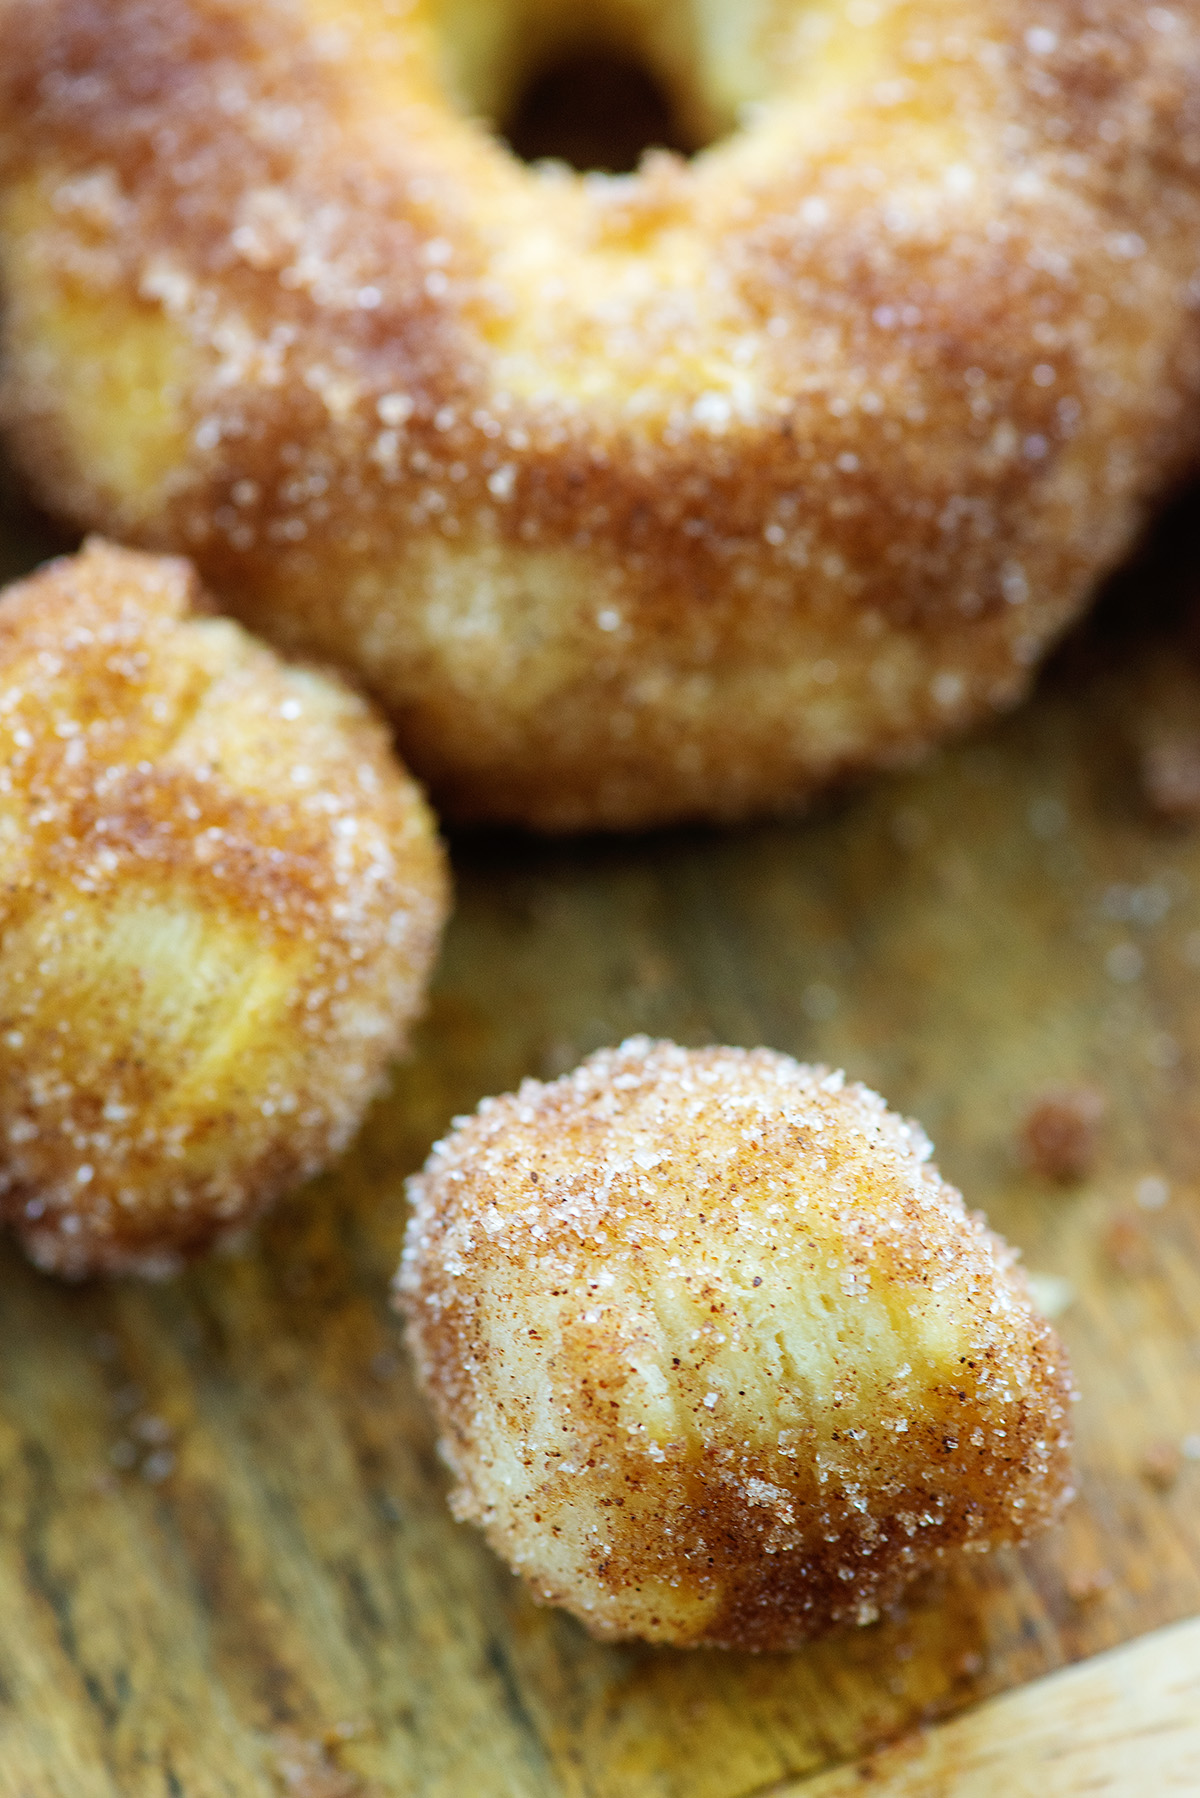 A close up of donut holes covered in cinnamon and sugar